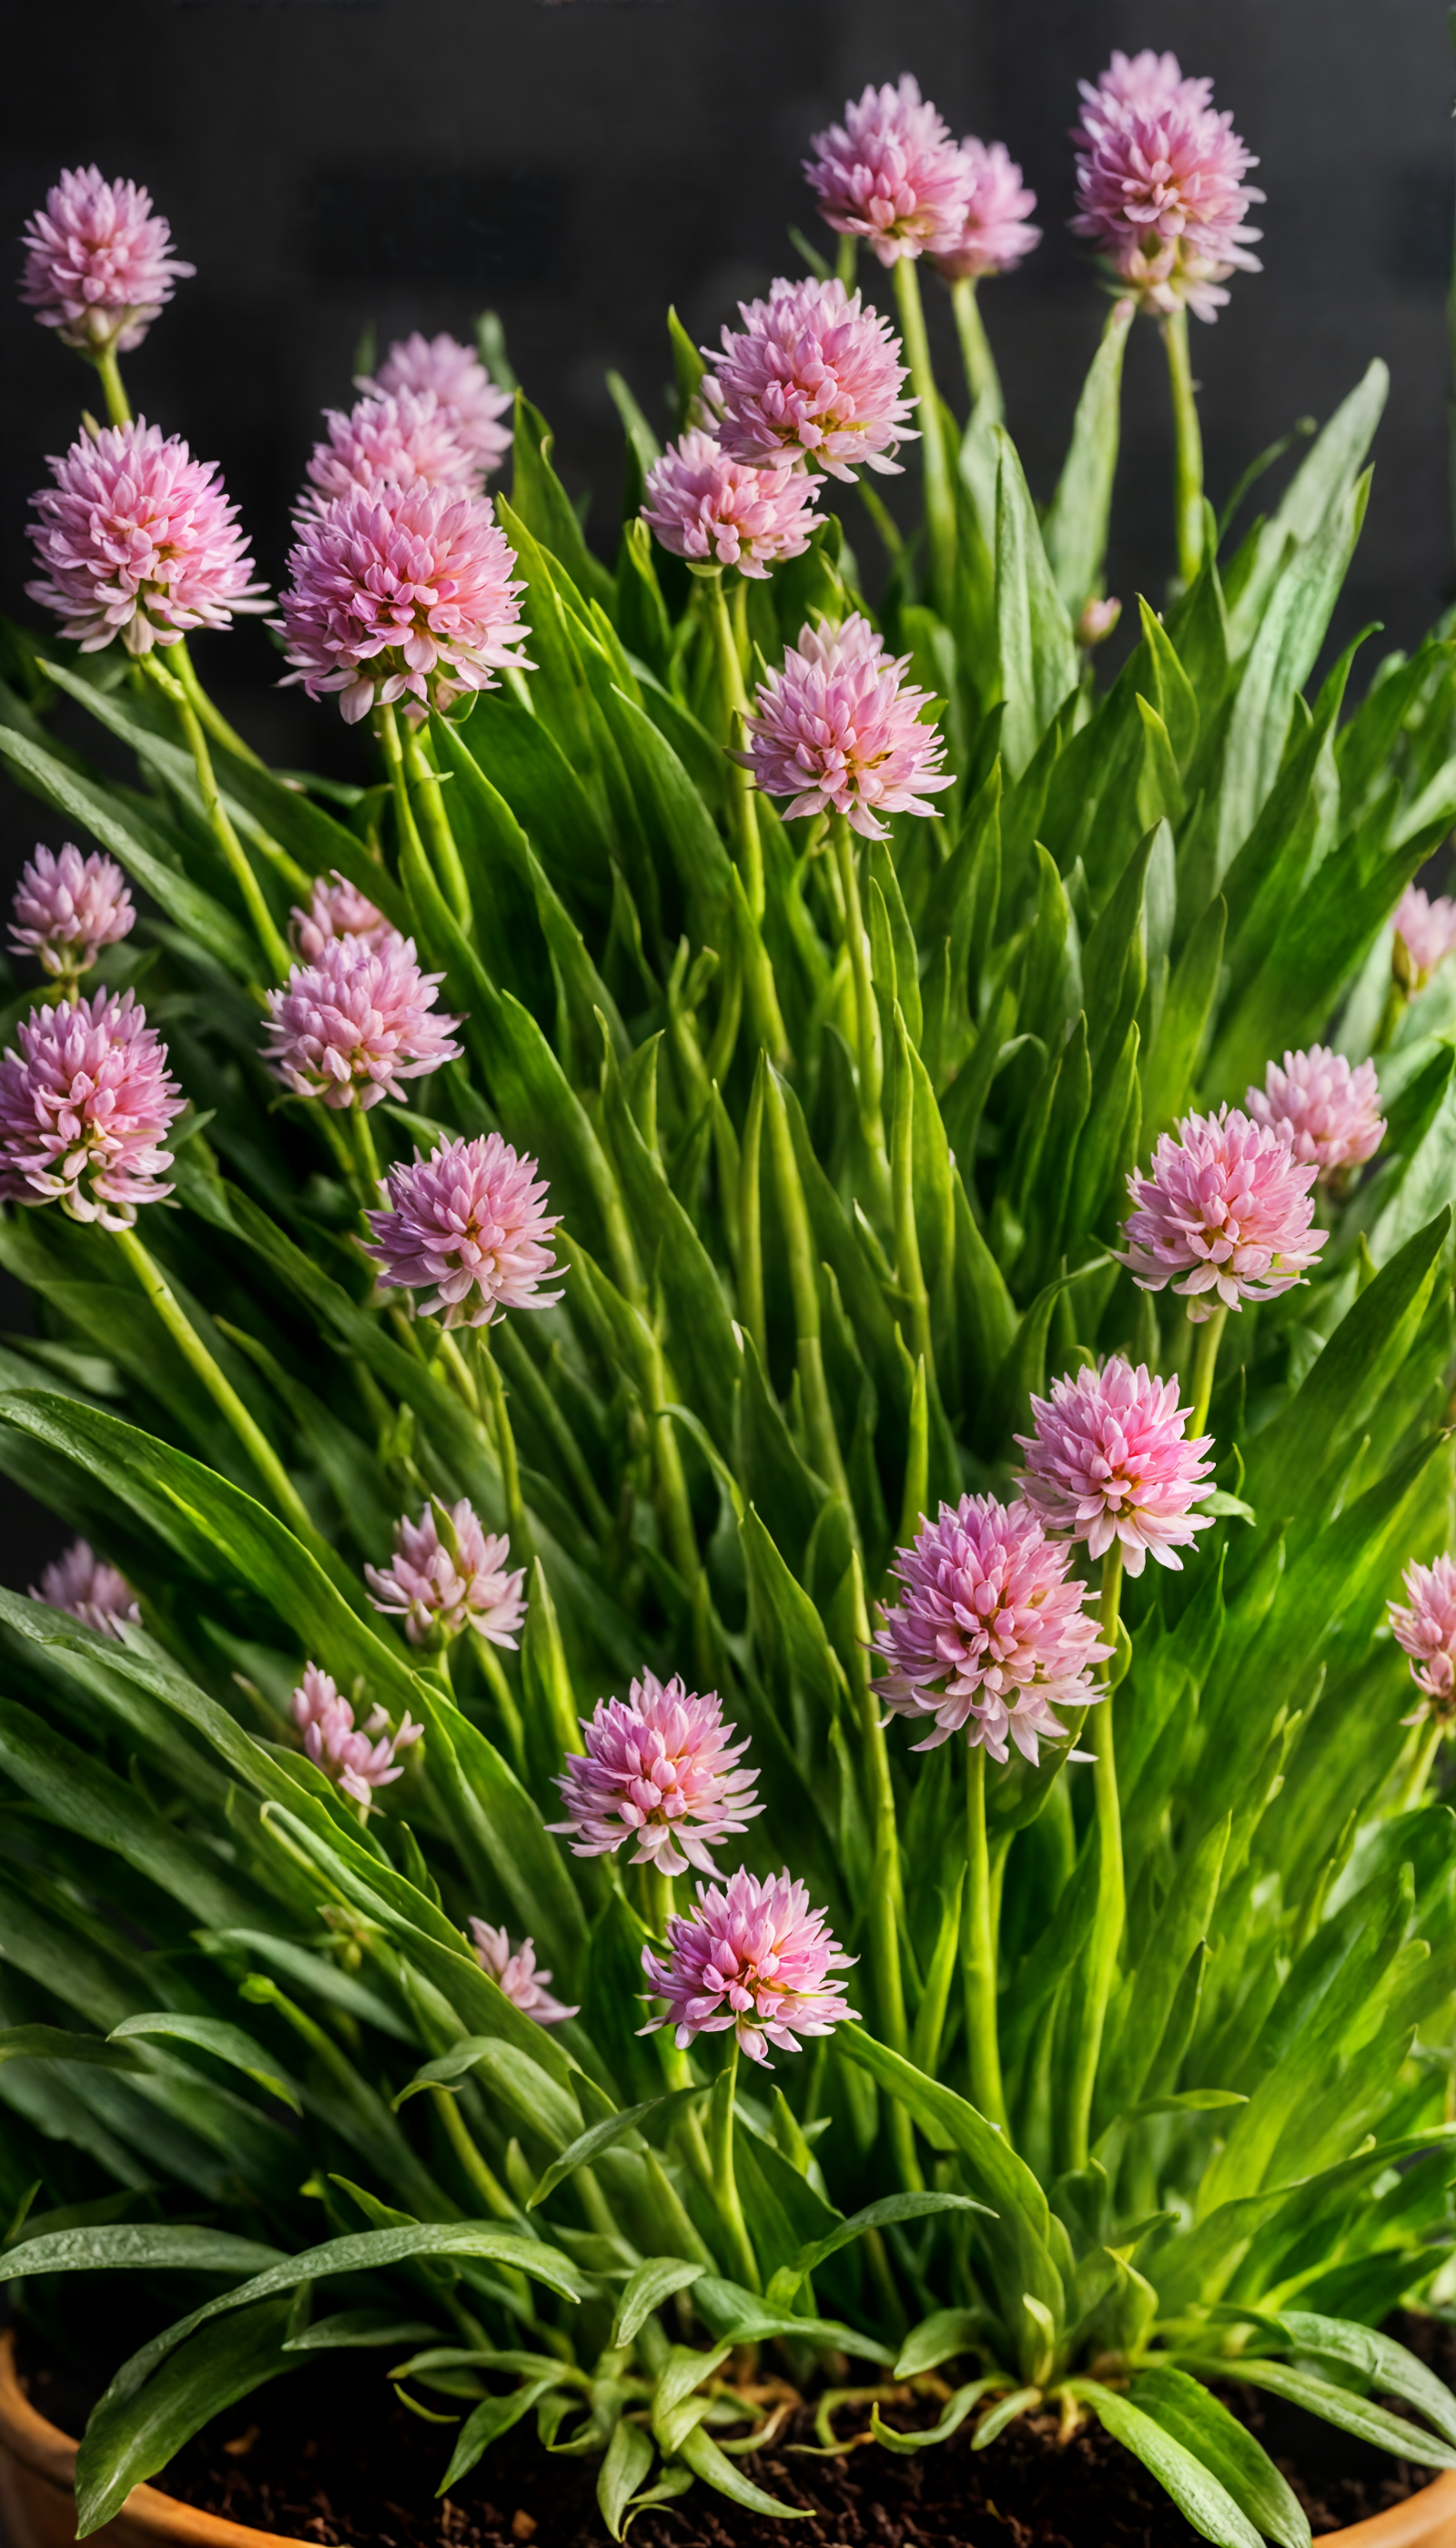 Potted Allium schoenoprasum (chives) with vibrant pink blooms, clear lighting, against a dark background.